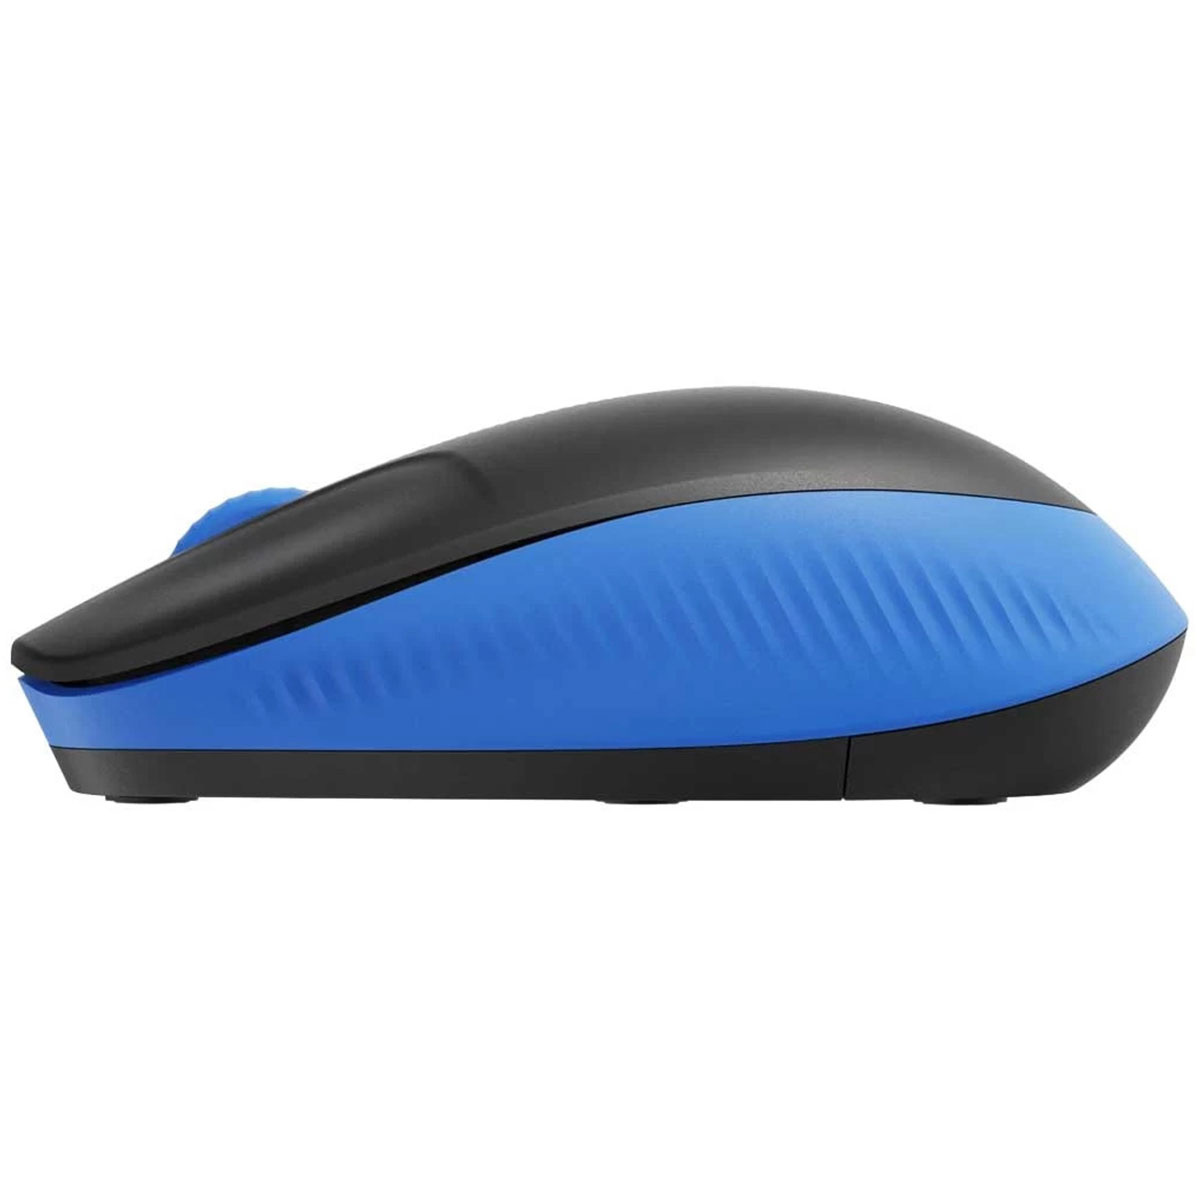 Buy LOGITECH Wireless Mouse (Blue) M190 at Best price